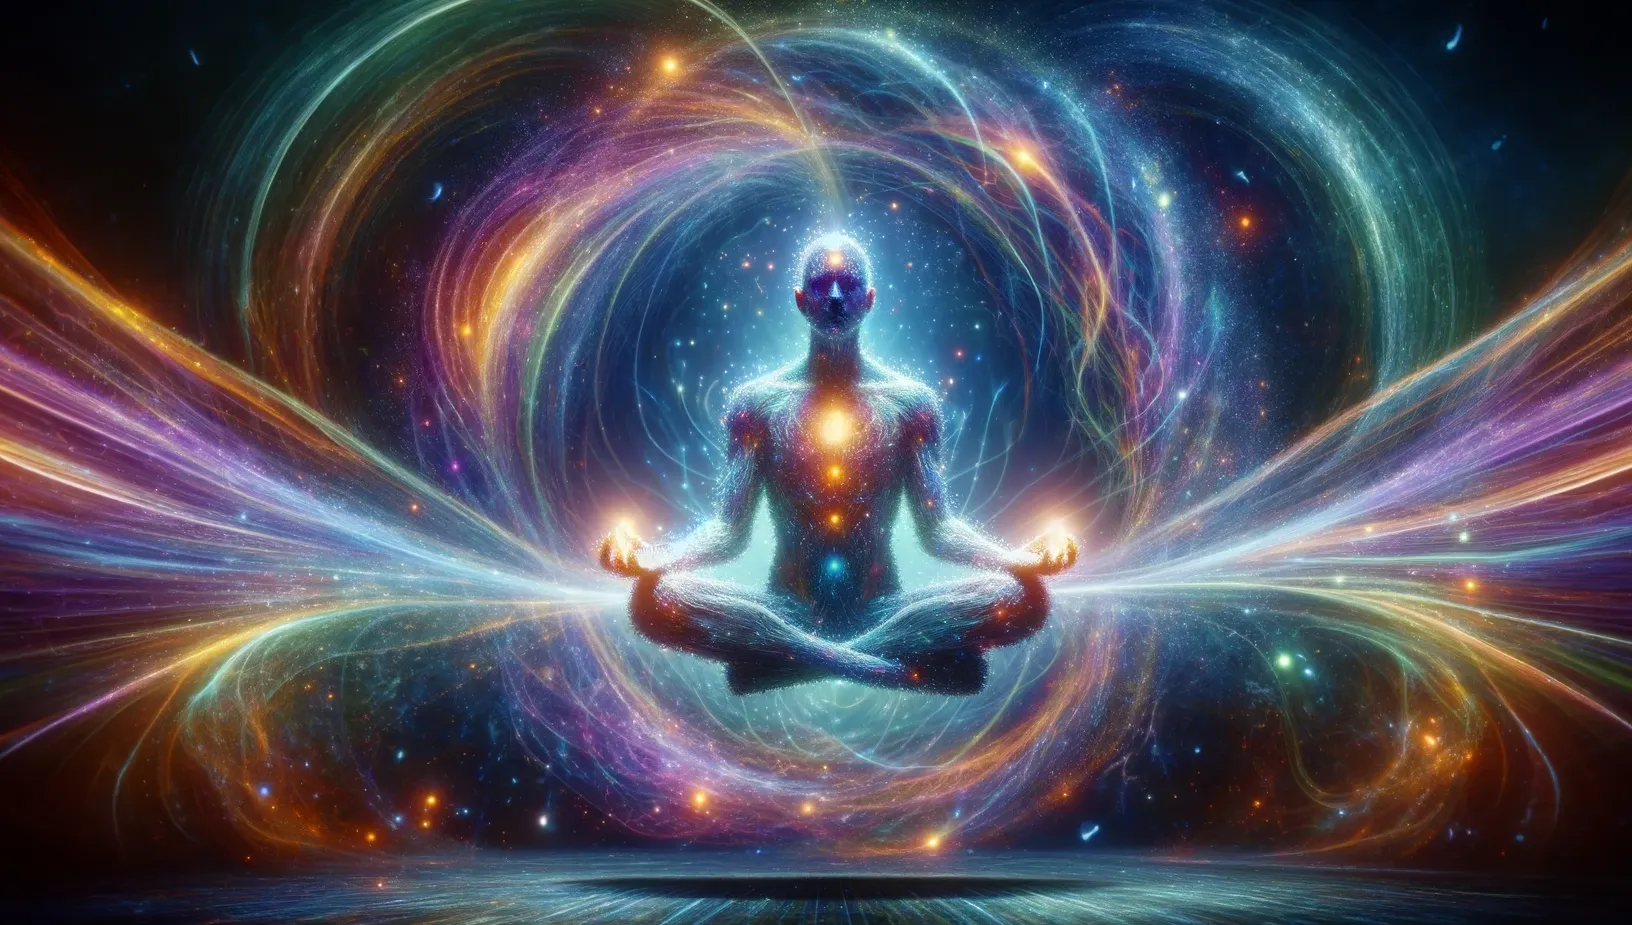 image of a person meditating with multi coloured energy field surrounding them